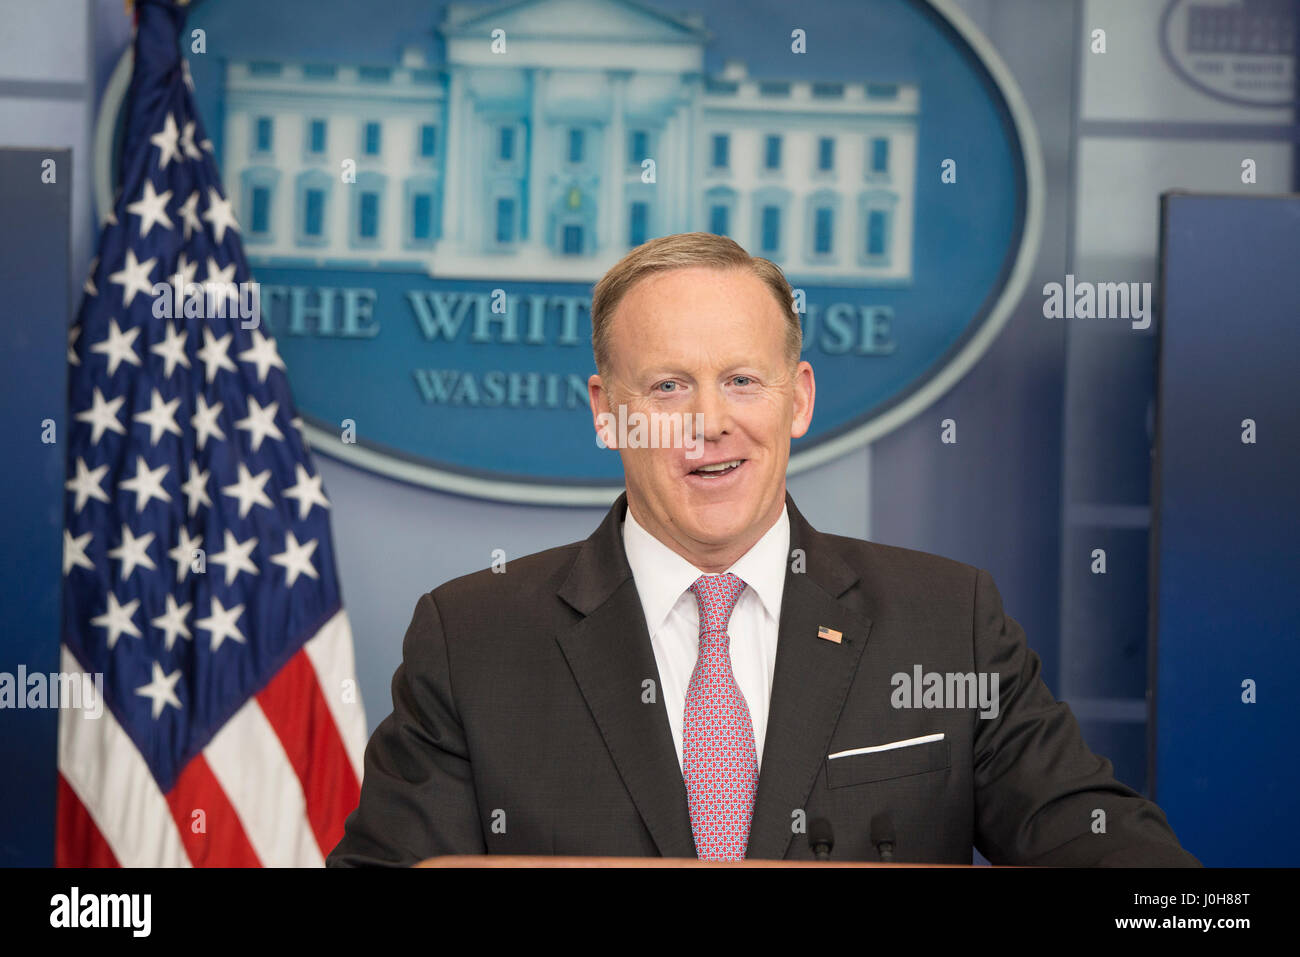 Washington DC, USA. 13th Apr, 2017.  Sean Spicer, the White House Press Secretary provides the White House Press with updated information about the latest military action and President Trump's travel plans for Florida. Credit: Patsy Lynch/Alamy Live News Stock Photo